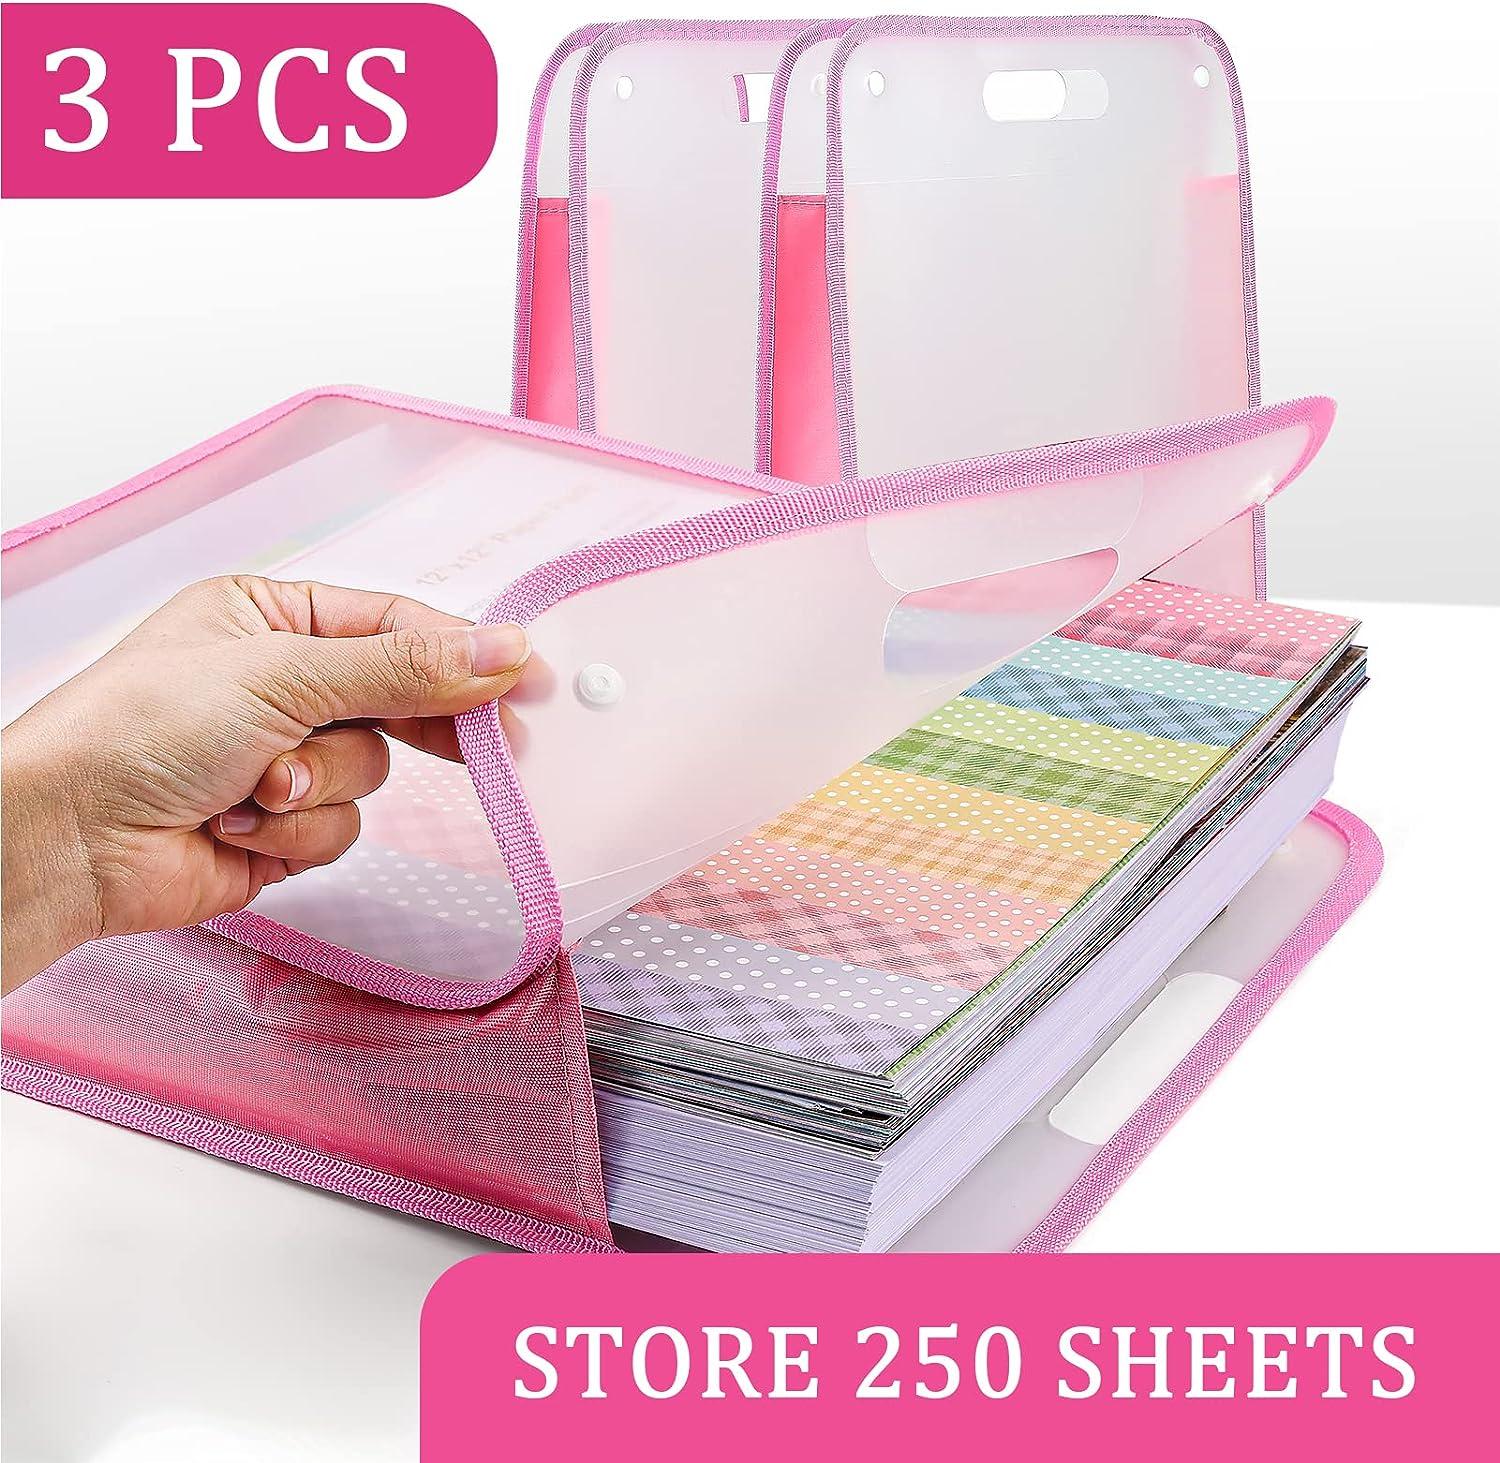 Scrapbook Paper Storage Organizer, Pink Expanding Paper Folio for 12 X 12  Sheets